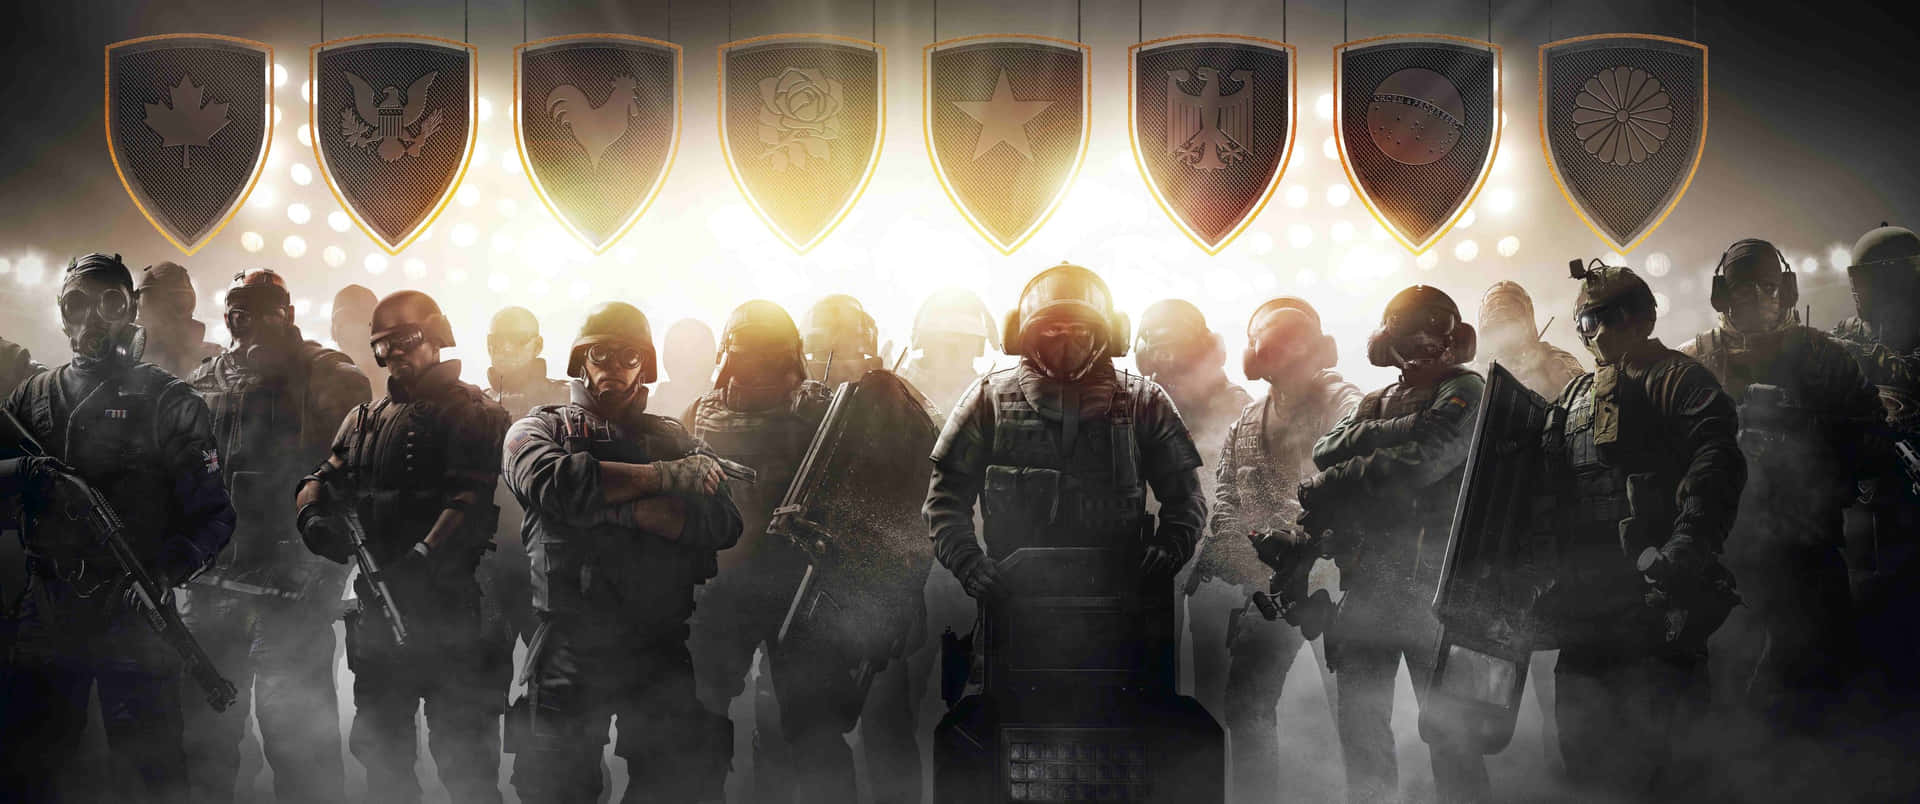 A Group Of Soldiers Standing In Front Of A Light